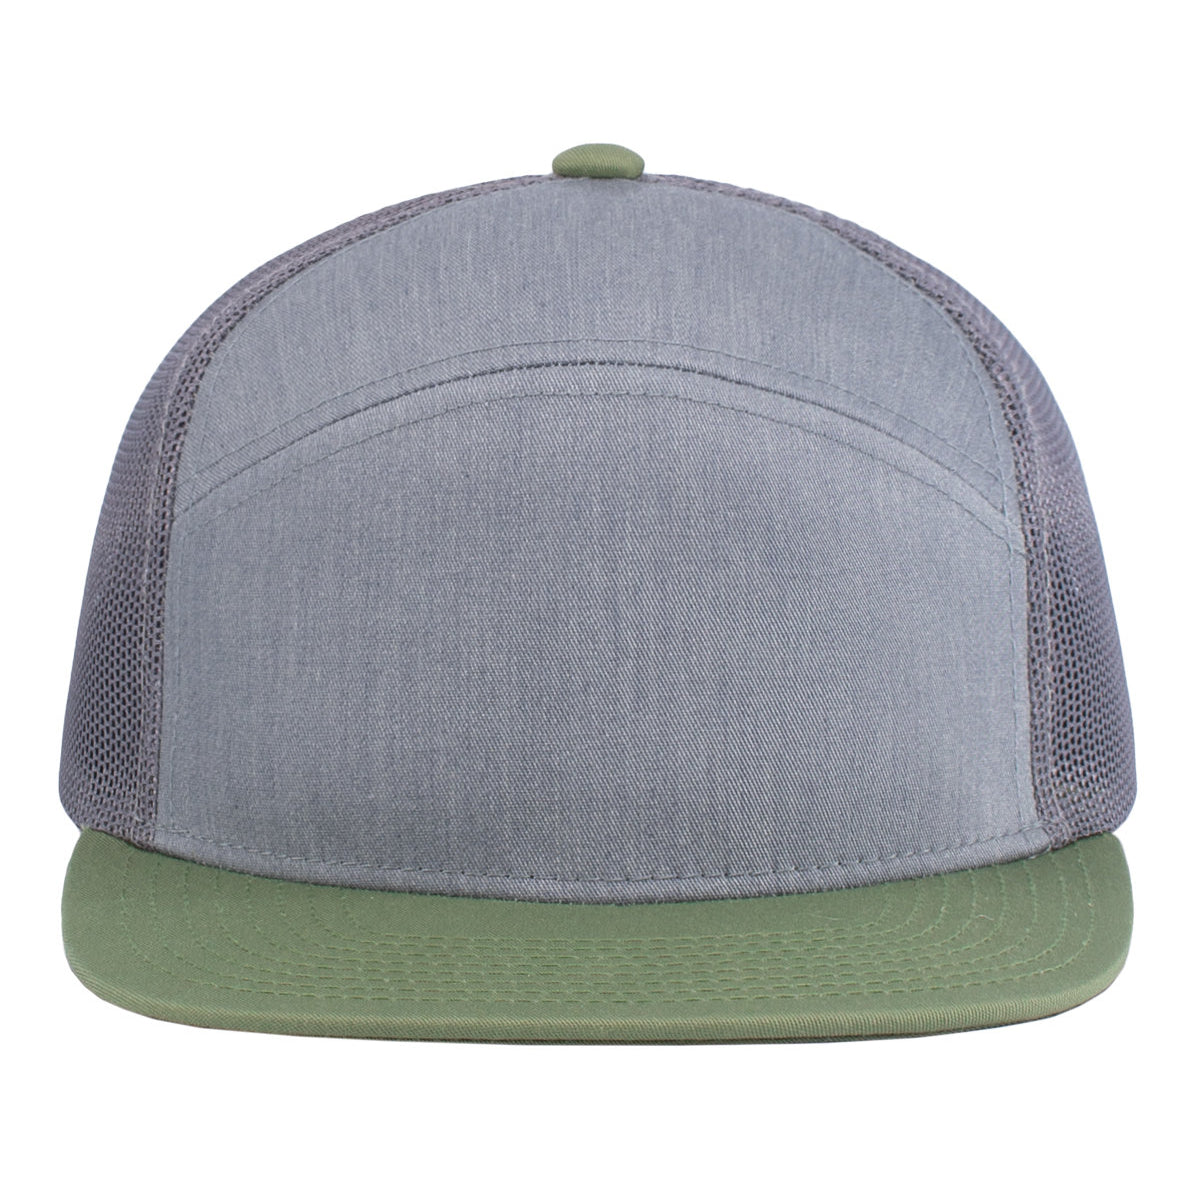 P787-PacificHeadwear-BC-HGRY_LODN_GRY-OS